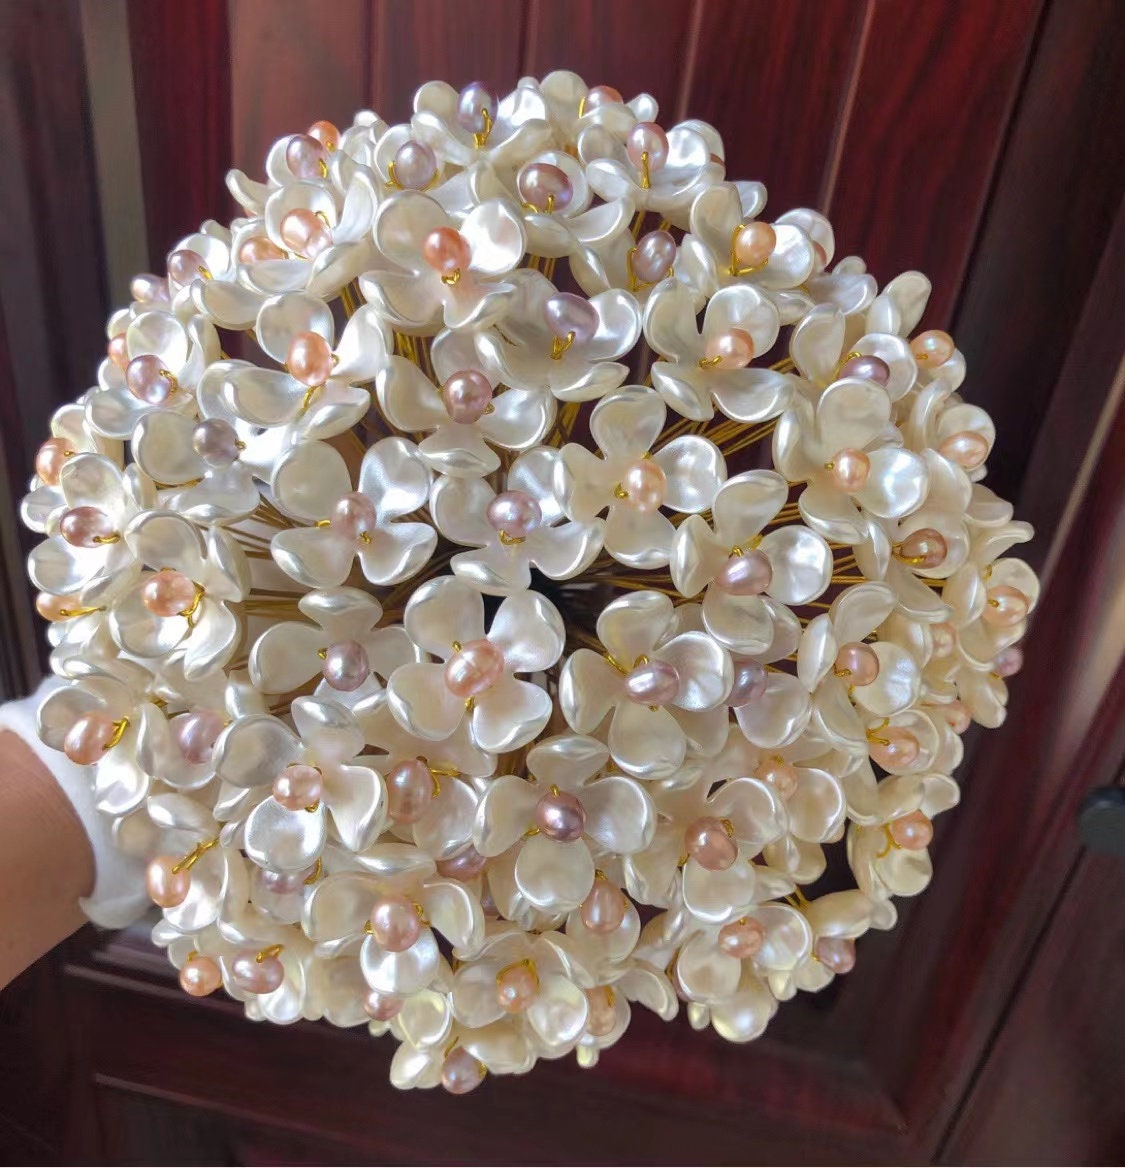 Handmade Pearl Diamond Feather Bouquet Wedding With Ball European And  Korean Wedding Decorations From Dressseller, $25.13